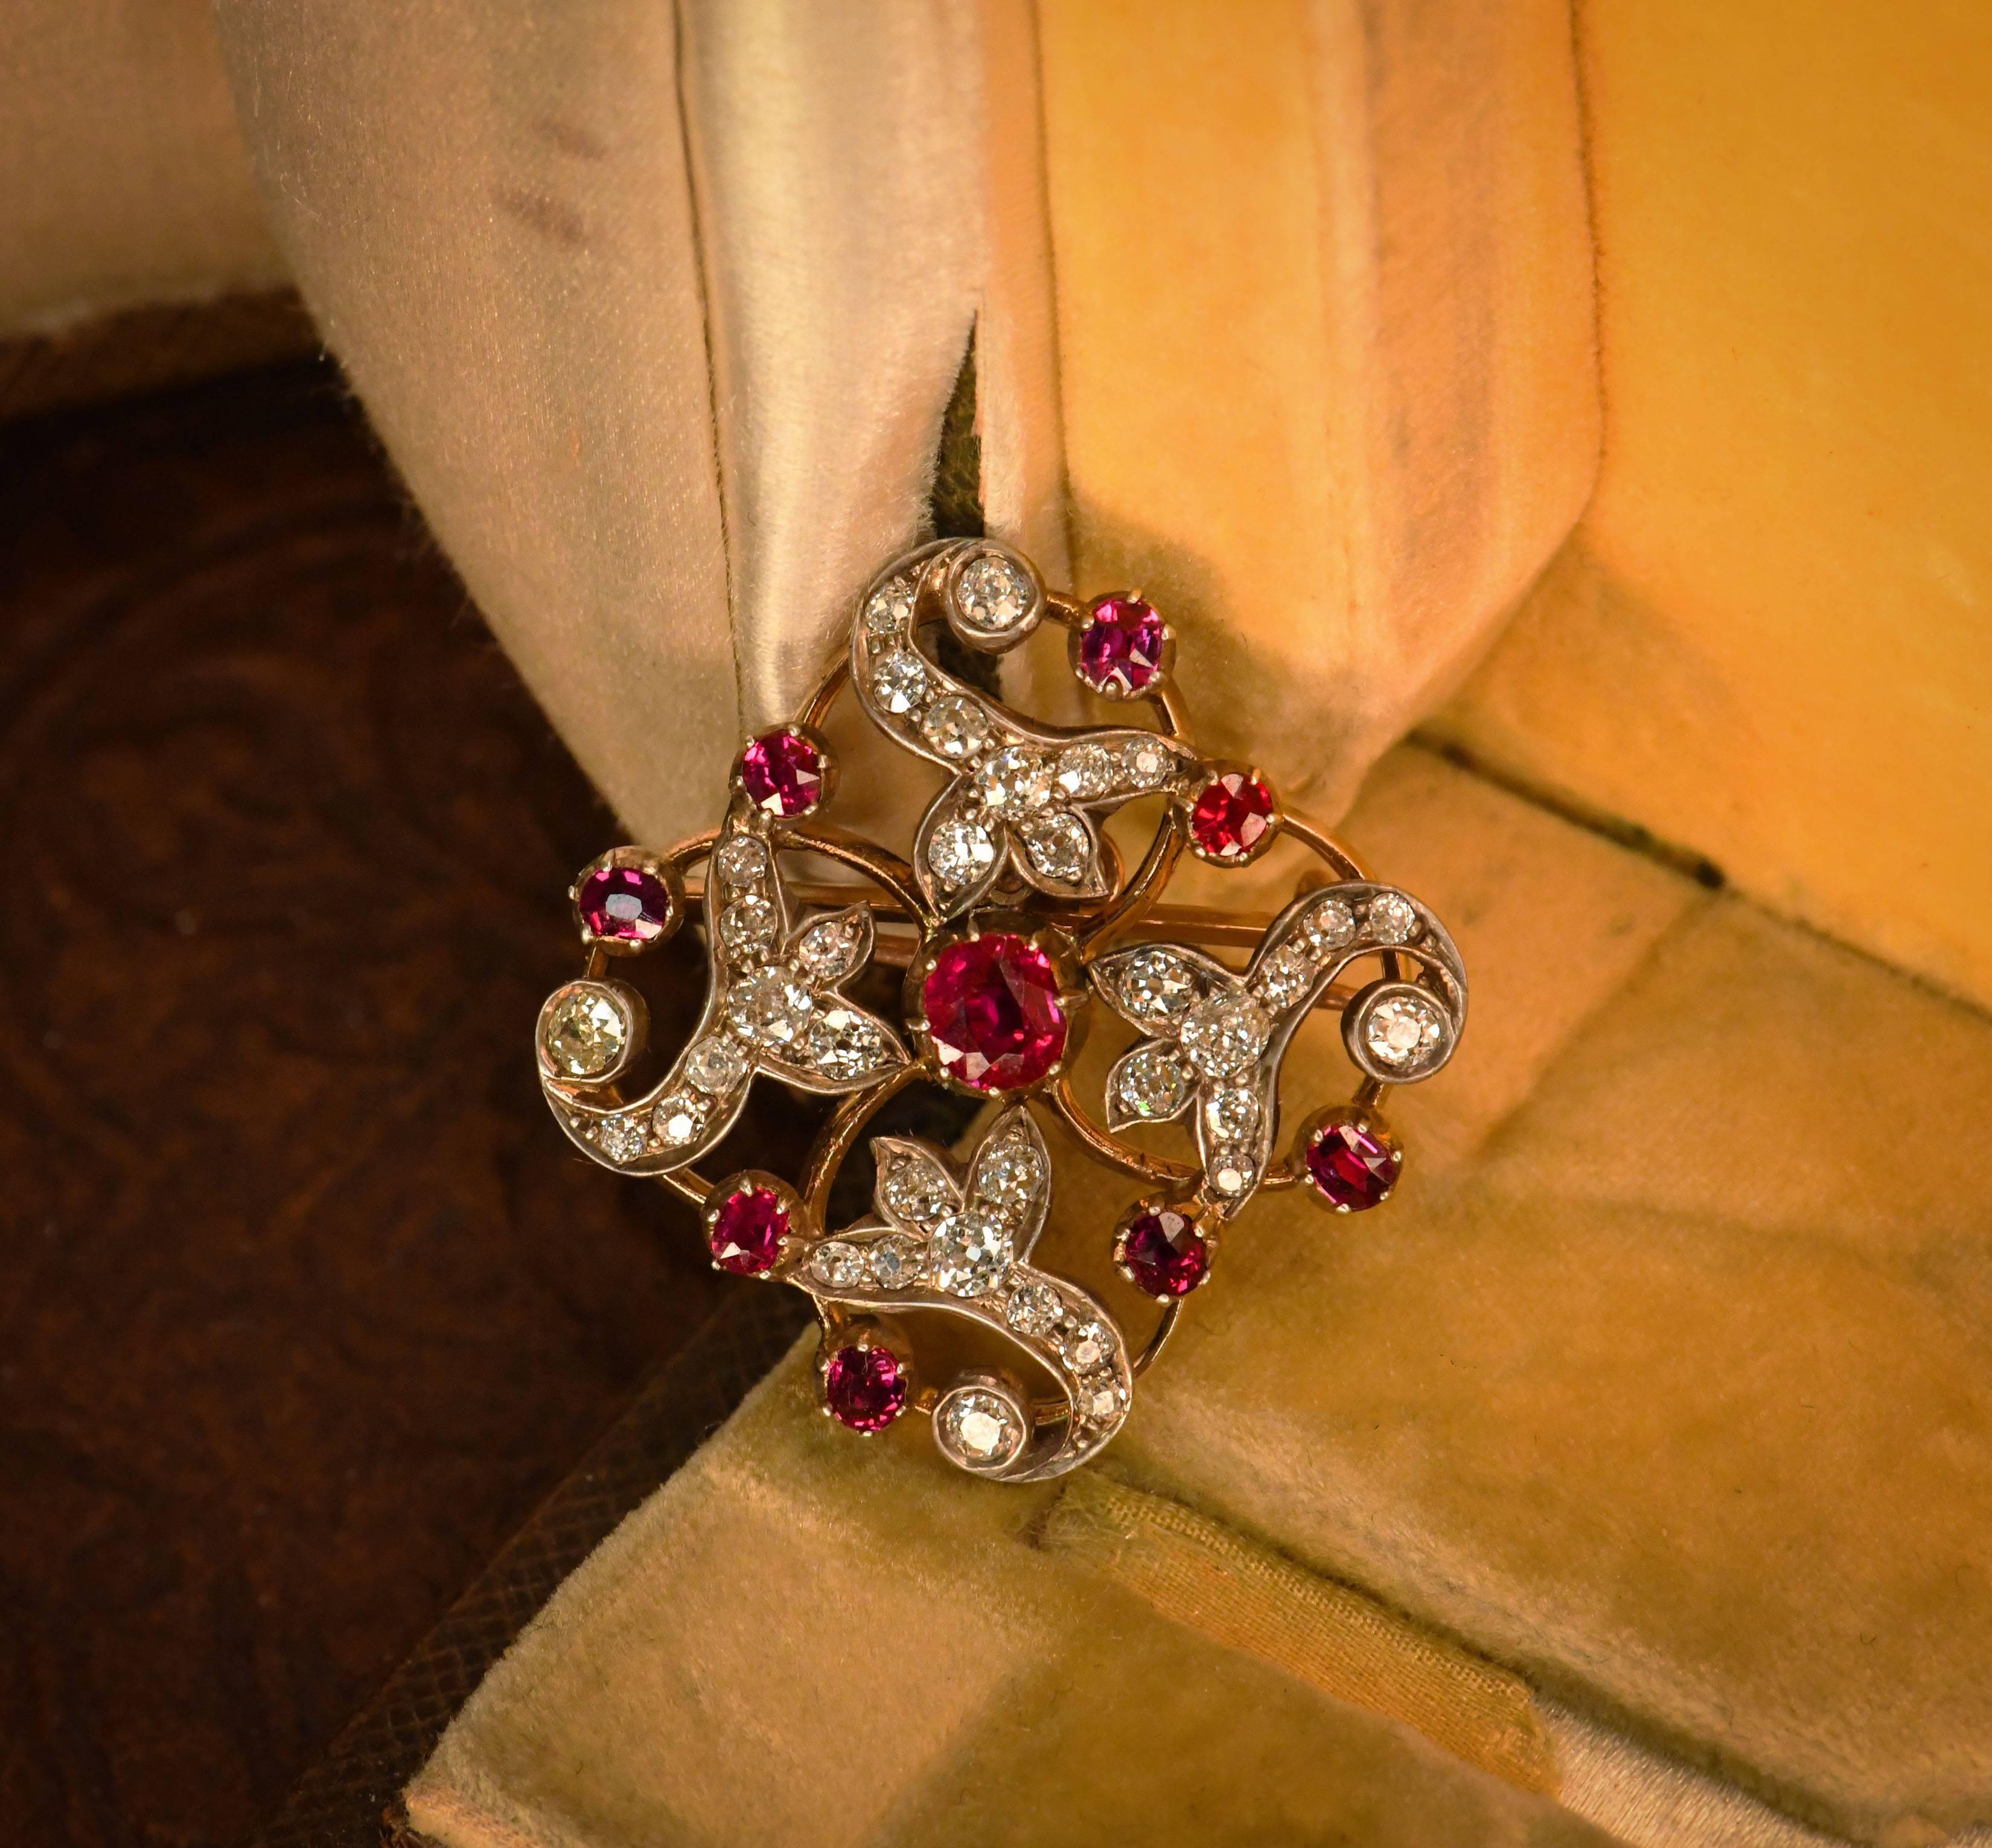 Graceful floral twirls of yellow gold framework enclosing bright and lively old European cut diamonds which twinkle and dance in the light. Enriching this elegant design are vivid rubies delicately placed around the diamonds. A larger ruby sits at